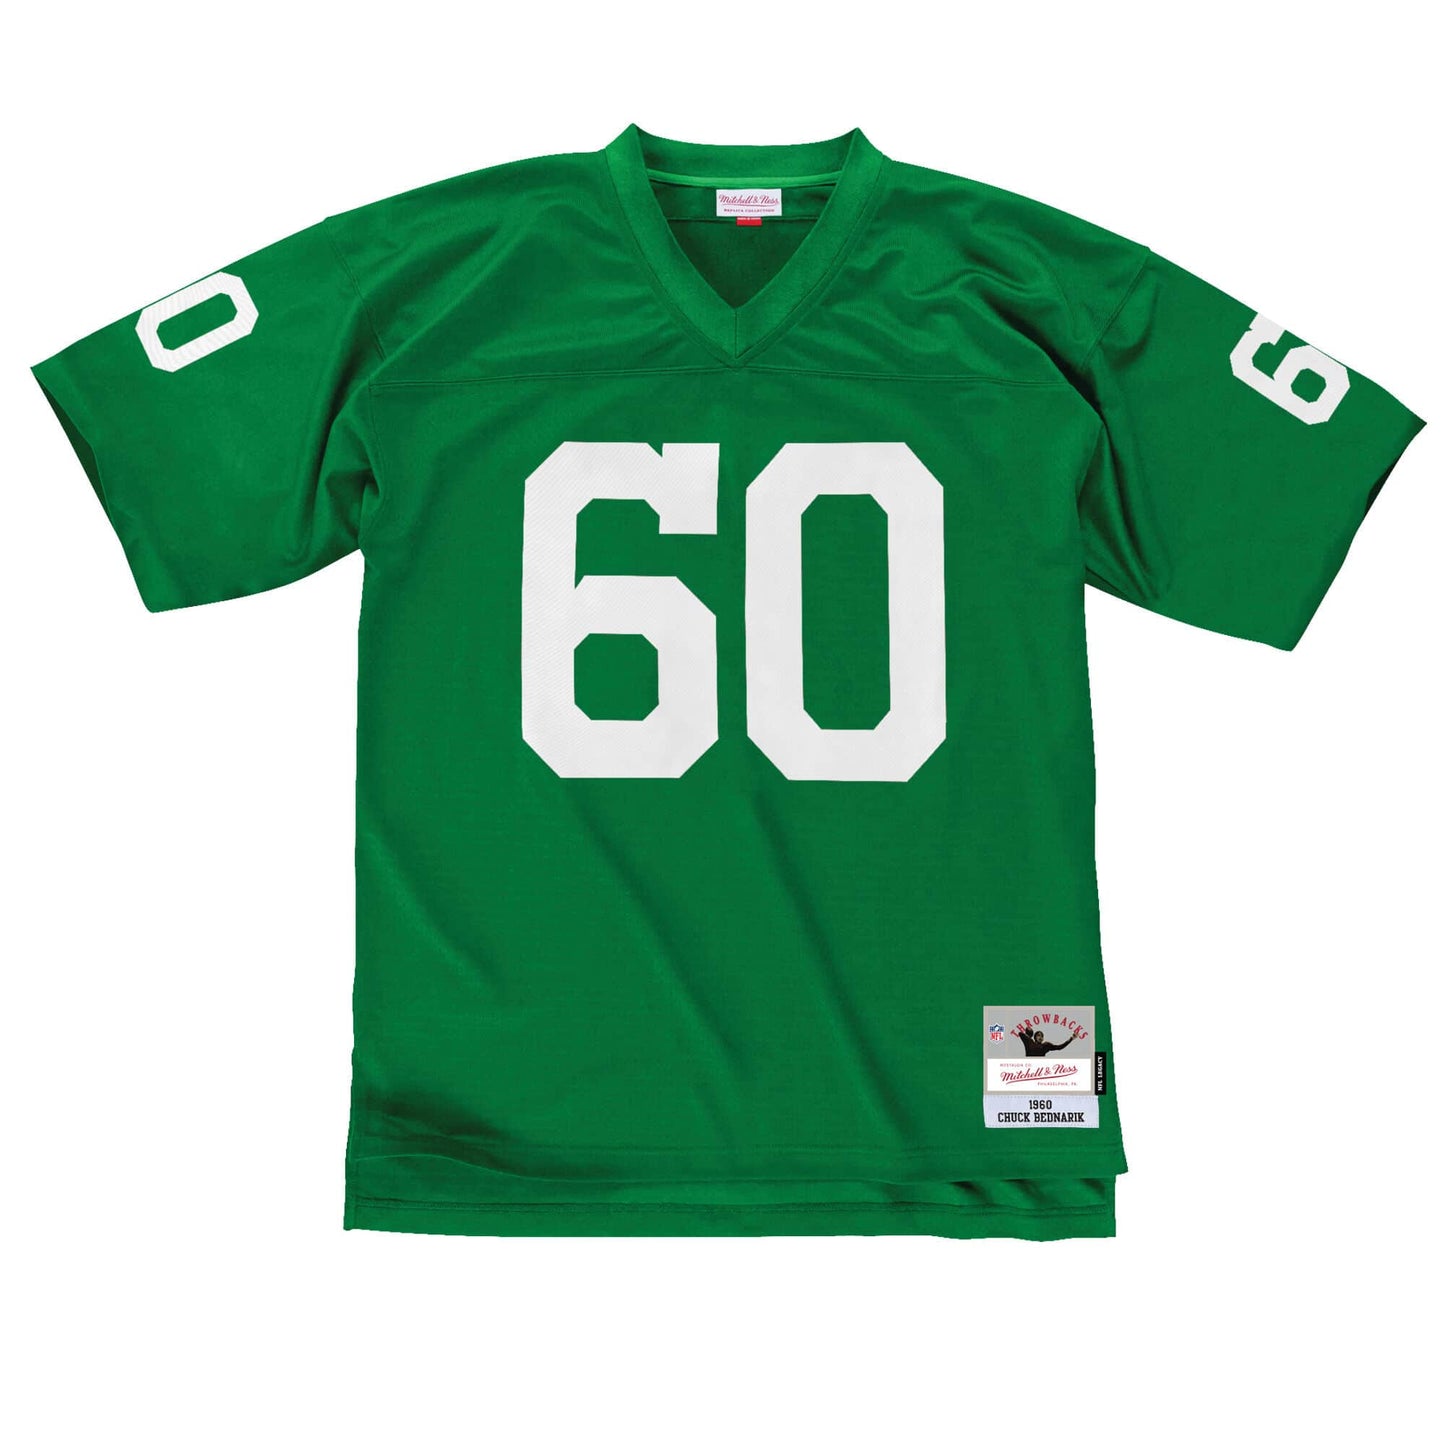 eagles jersey 60